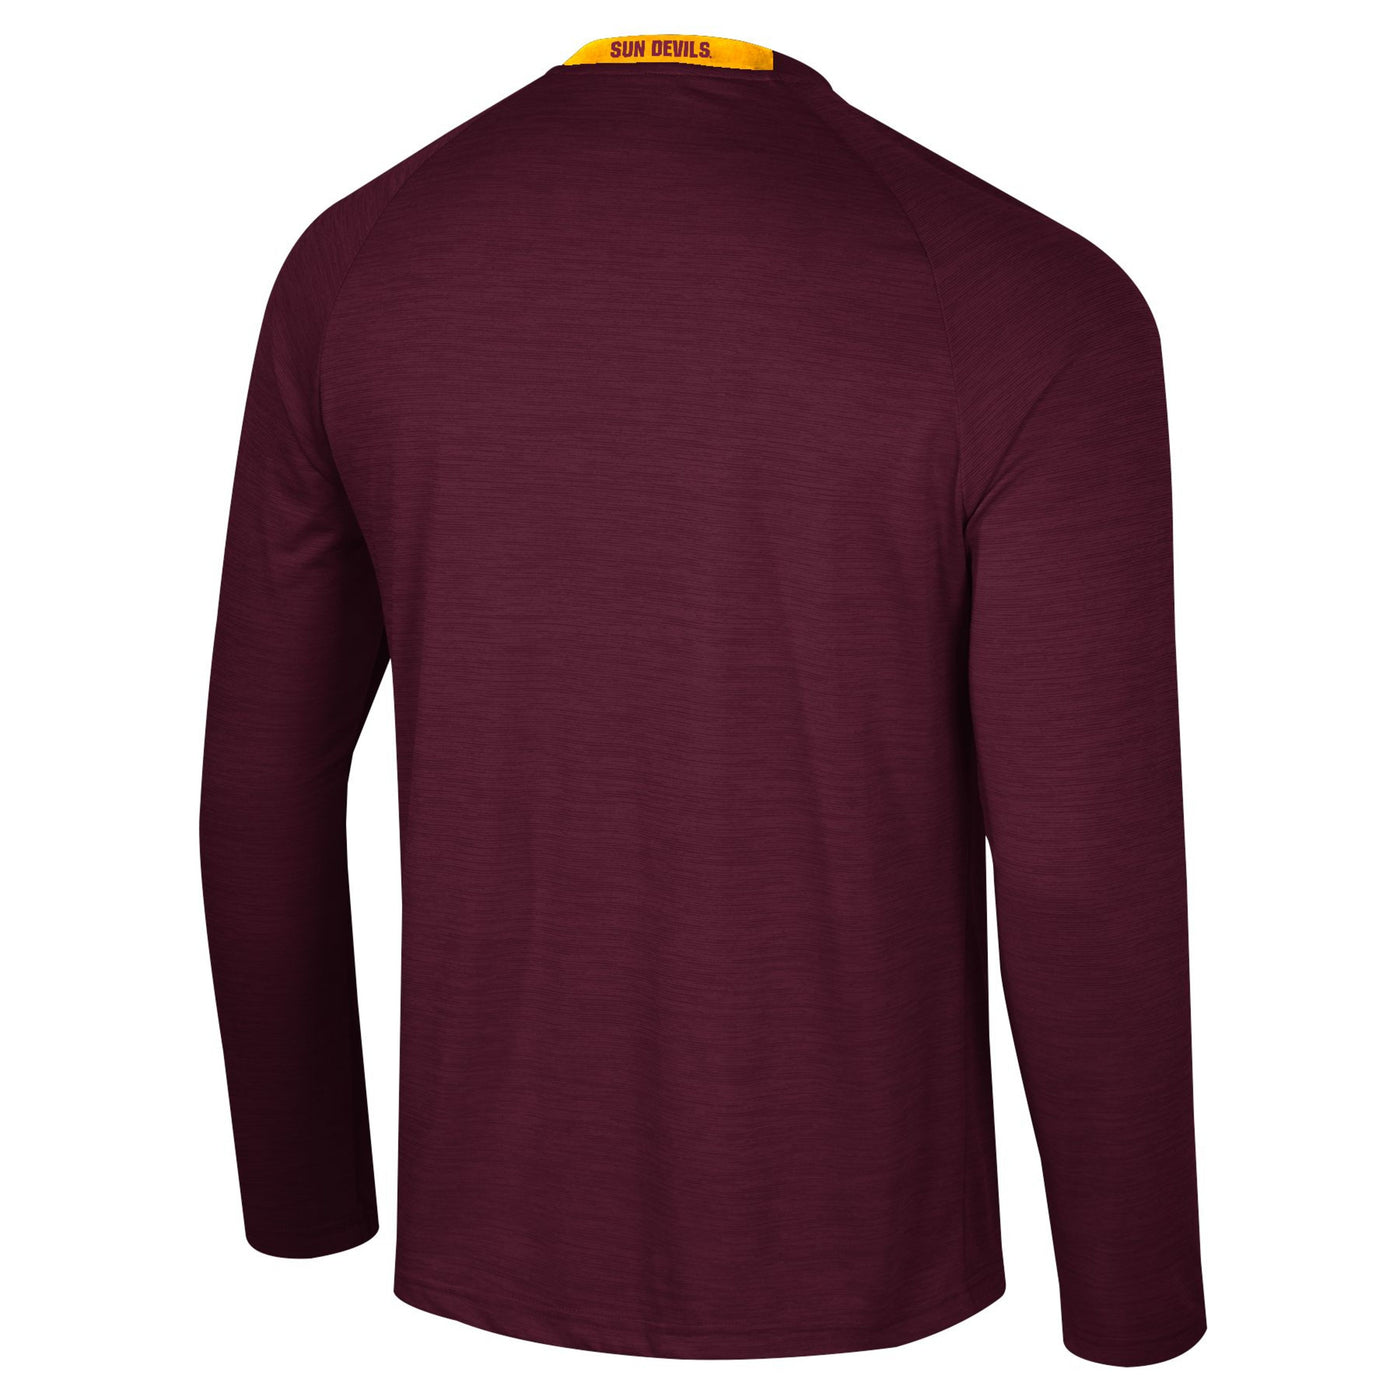 Backside of asu maroon long sleeve with a small stripe of gold lining the collar that includes the text 